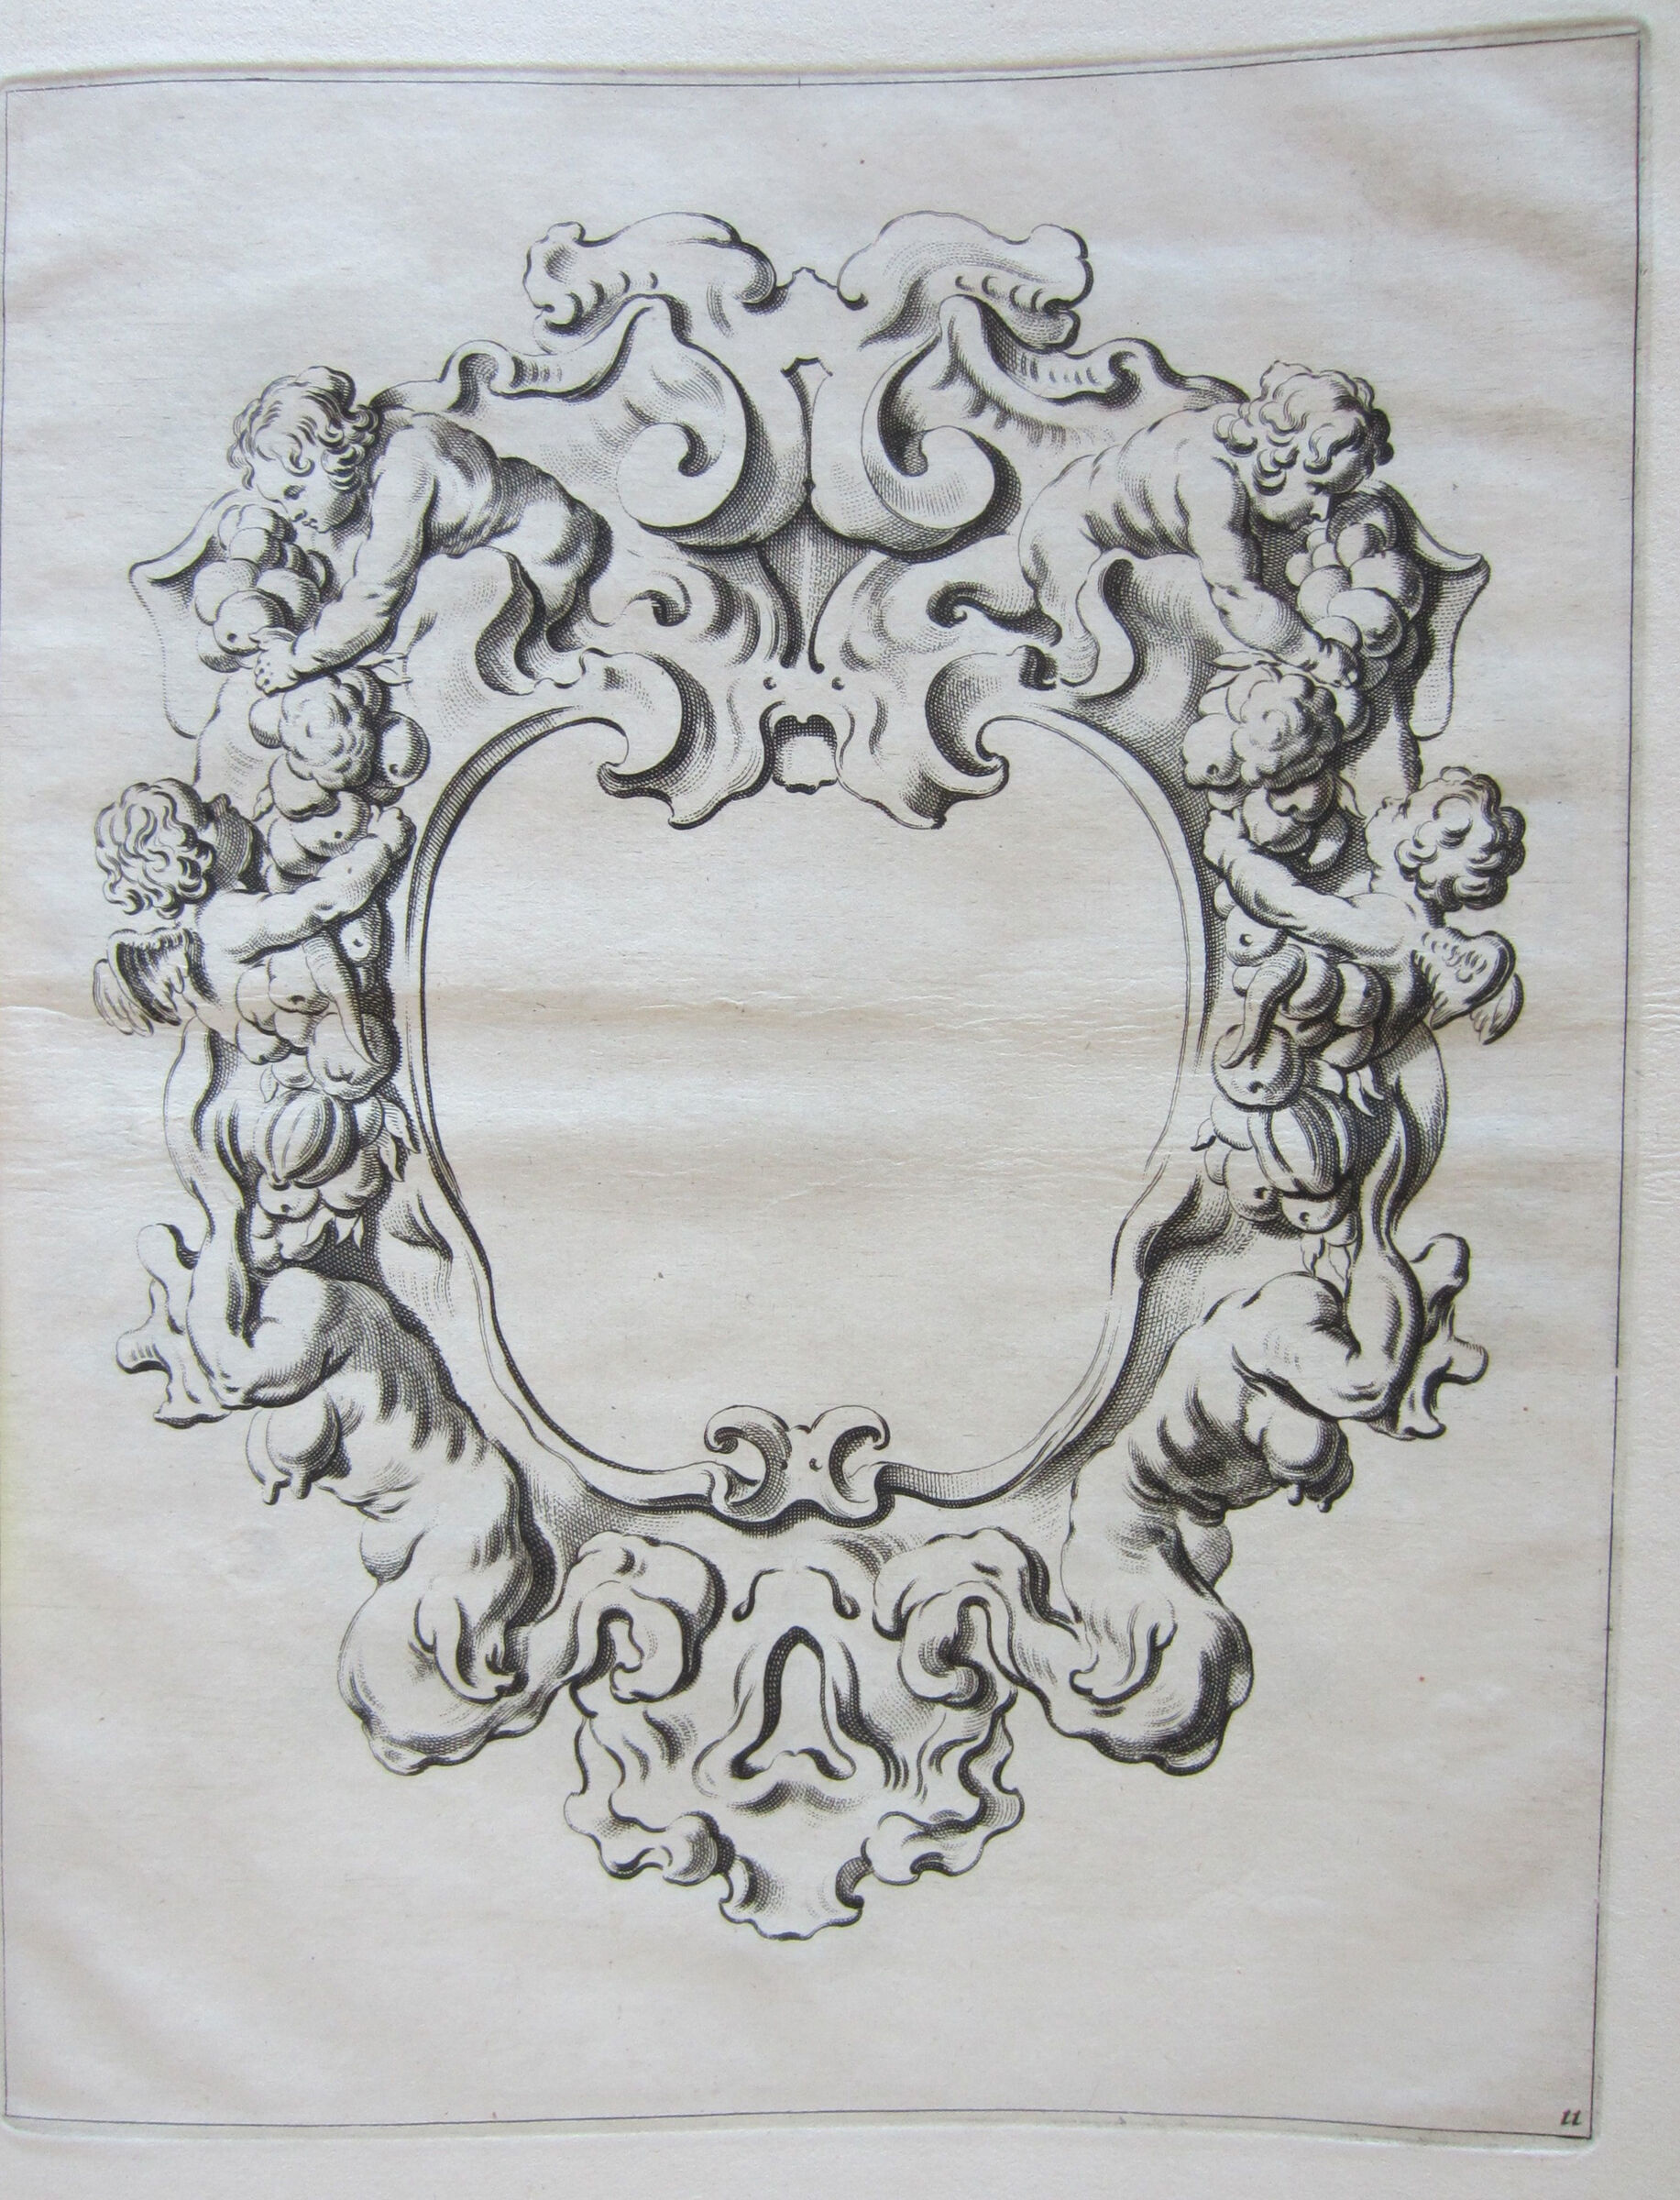 Auricular Cartouche With Four Putti, Two With Wings, And Monstrous Female Figures Grasping Fruit Garlands